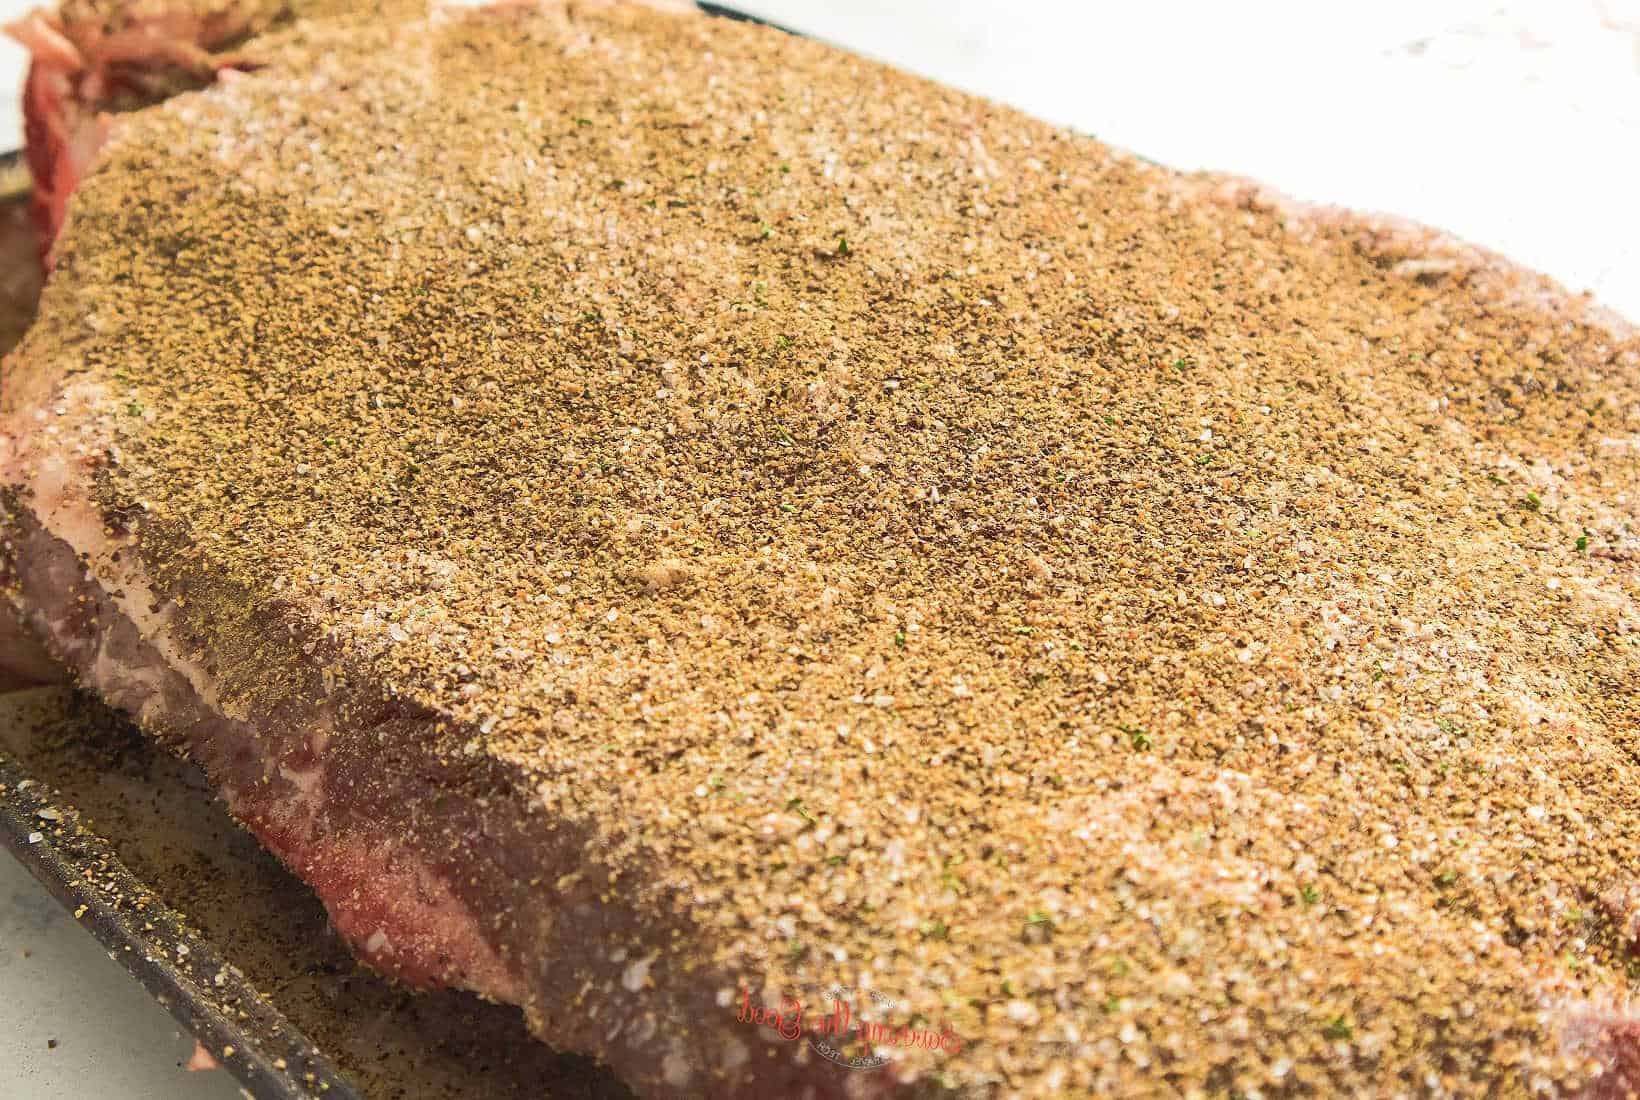 spice rubbed brisket for smoking. no meat showing.